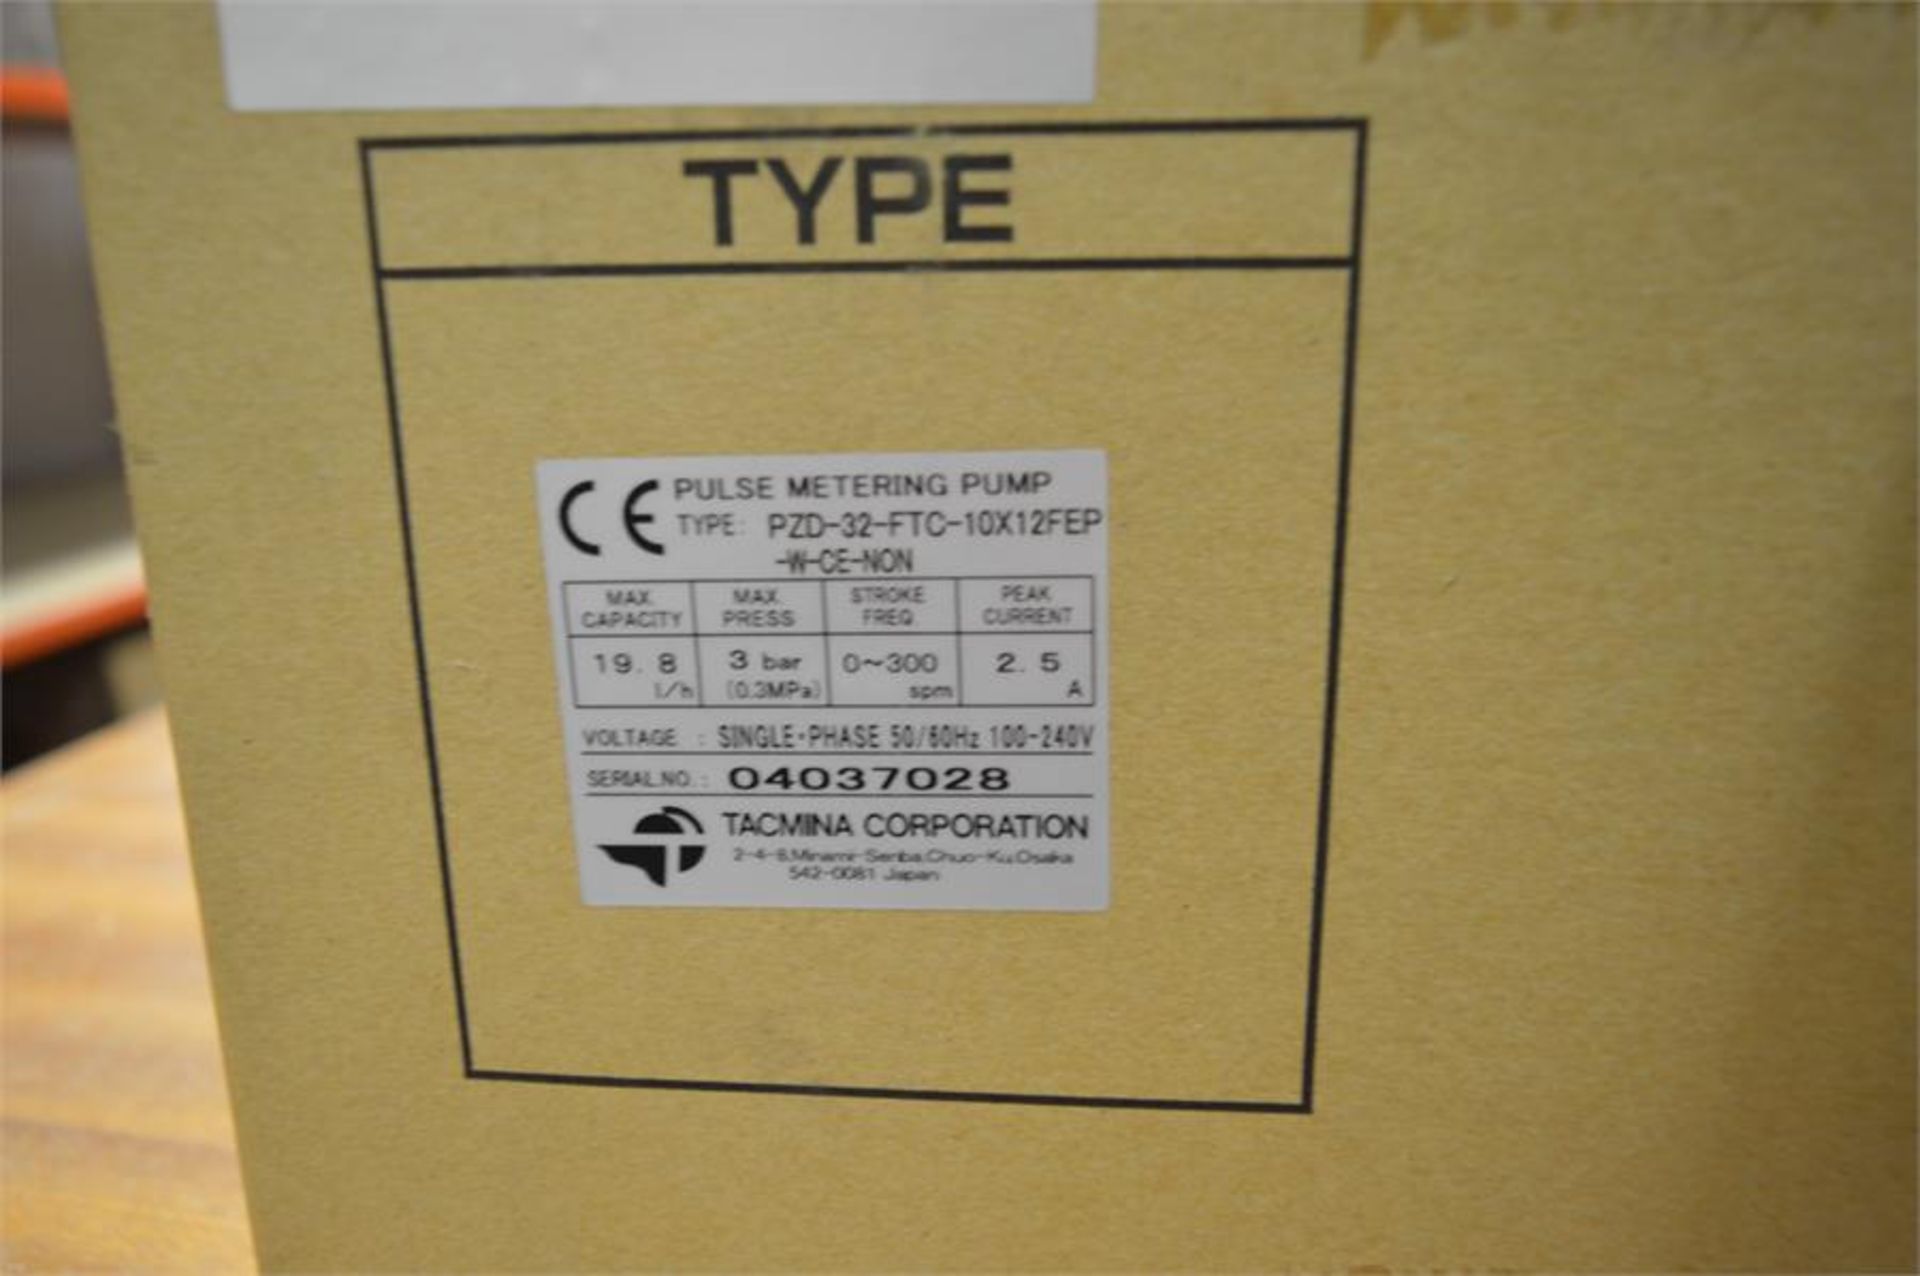 Tacmina, PZD-32-FTC-10X12FEP-W-CE-NON, pulse metering pump (boxed/opened) - Image 2 of 2